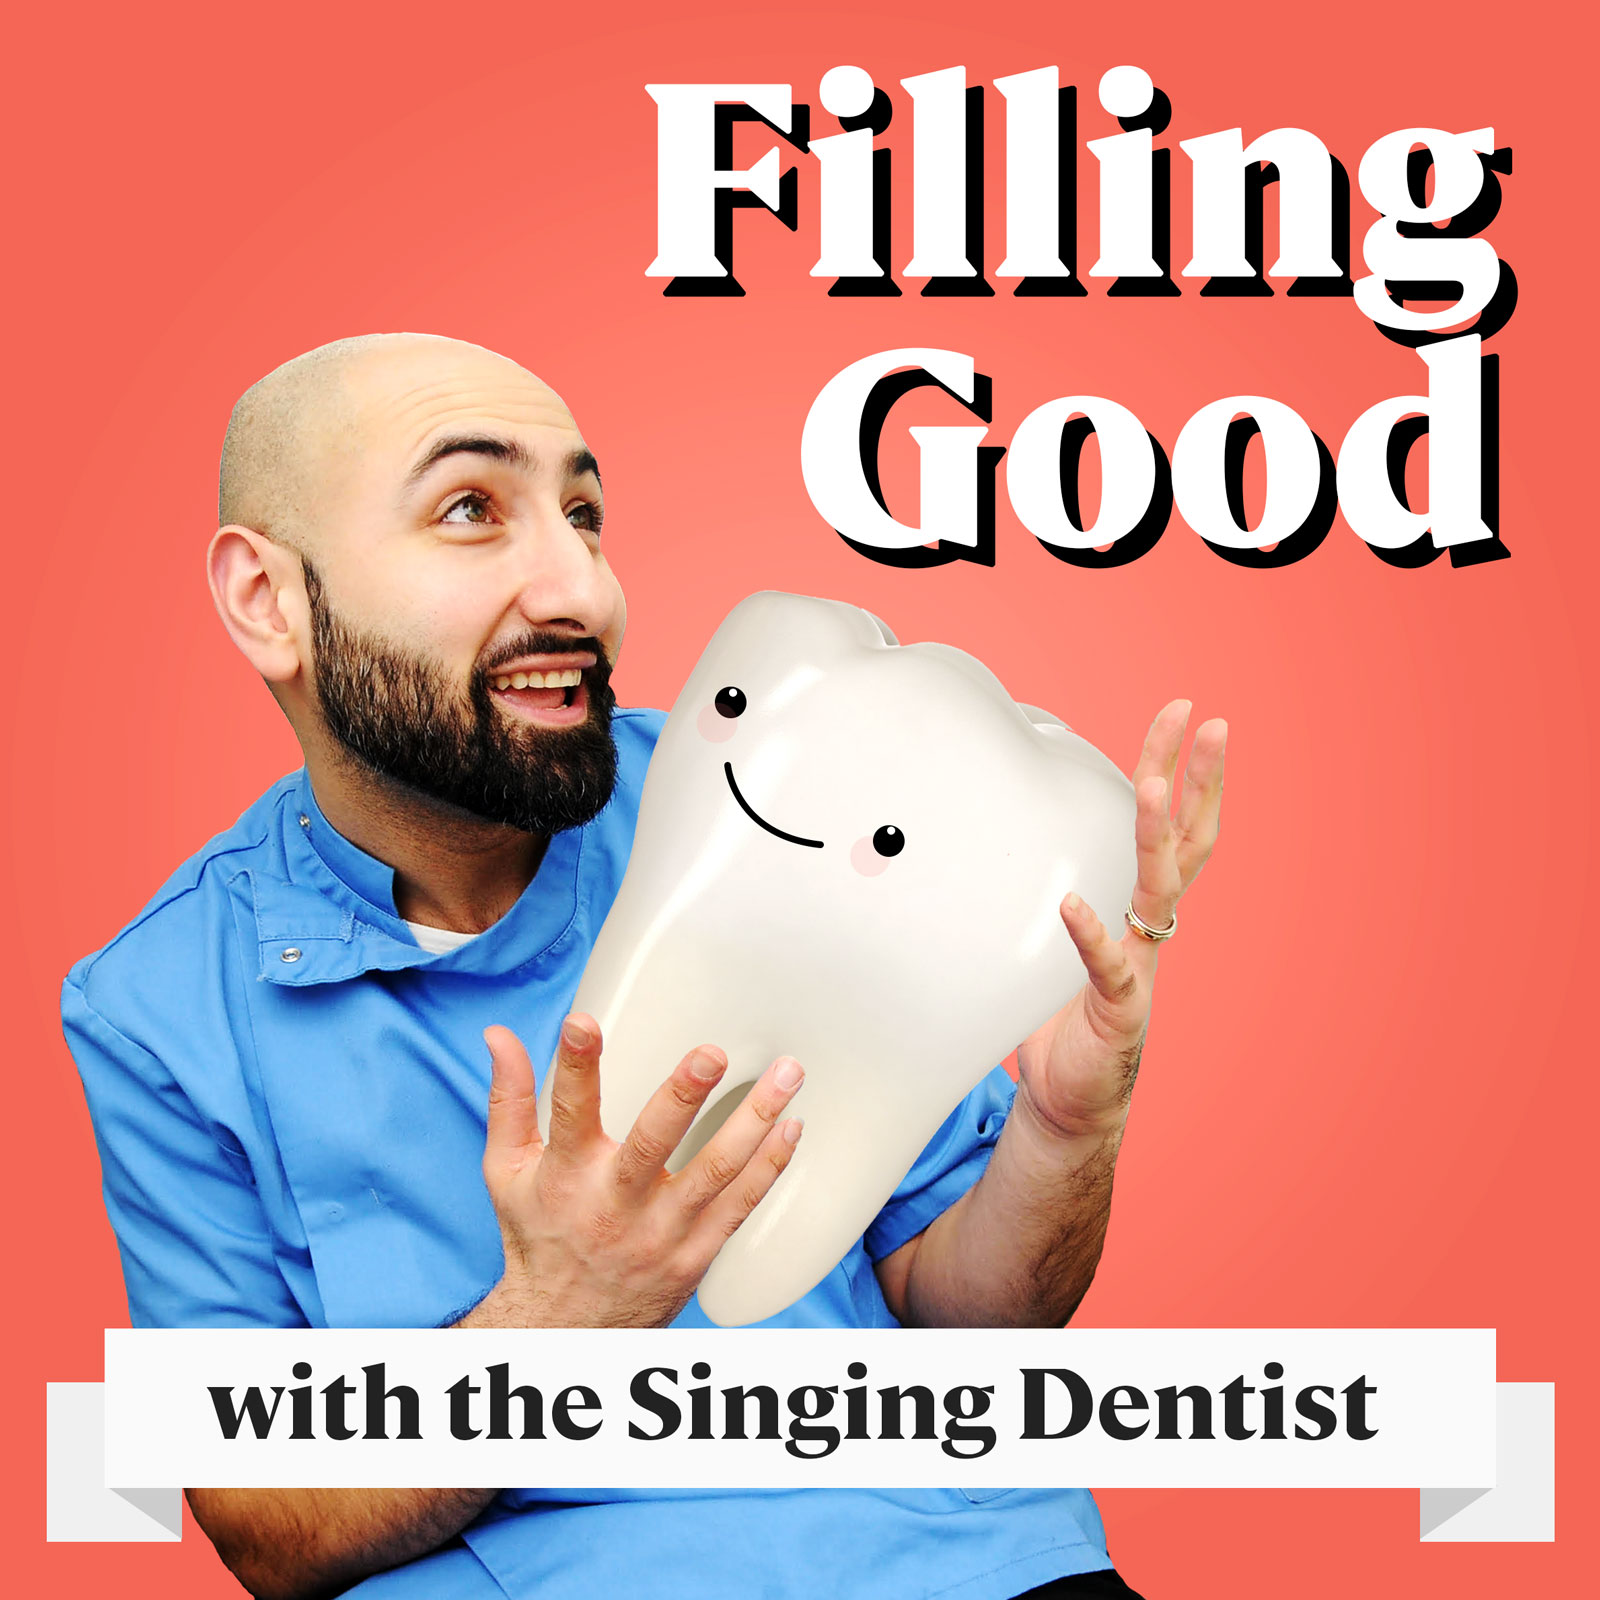 Filling Good with the Singing Dentist